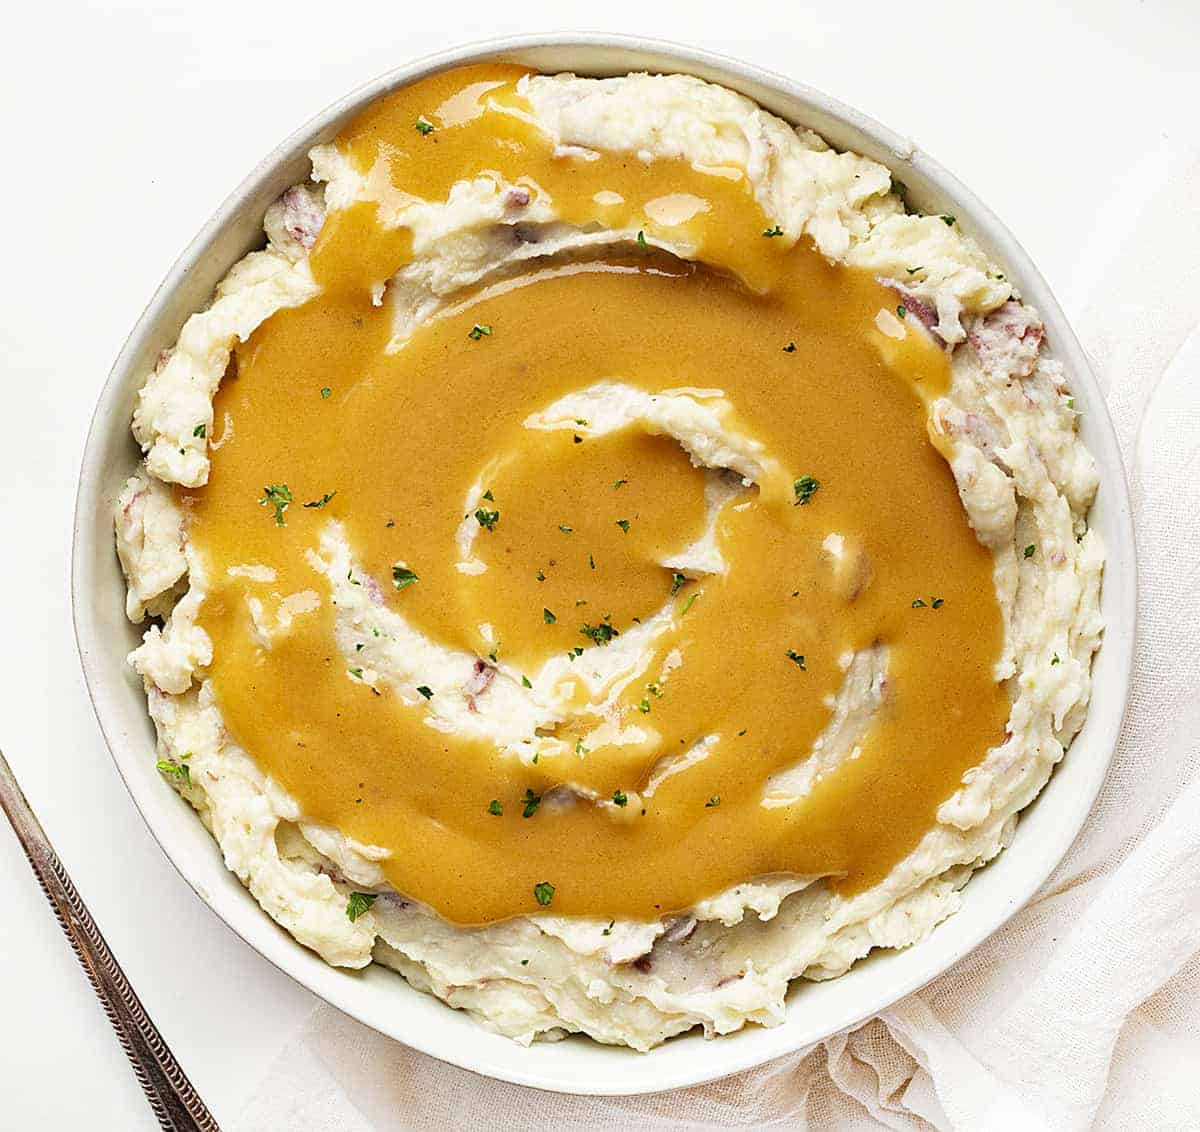 Bowl of Skins On Mashed Potatoes with Gravy